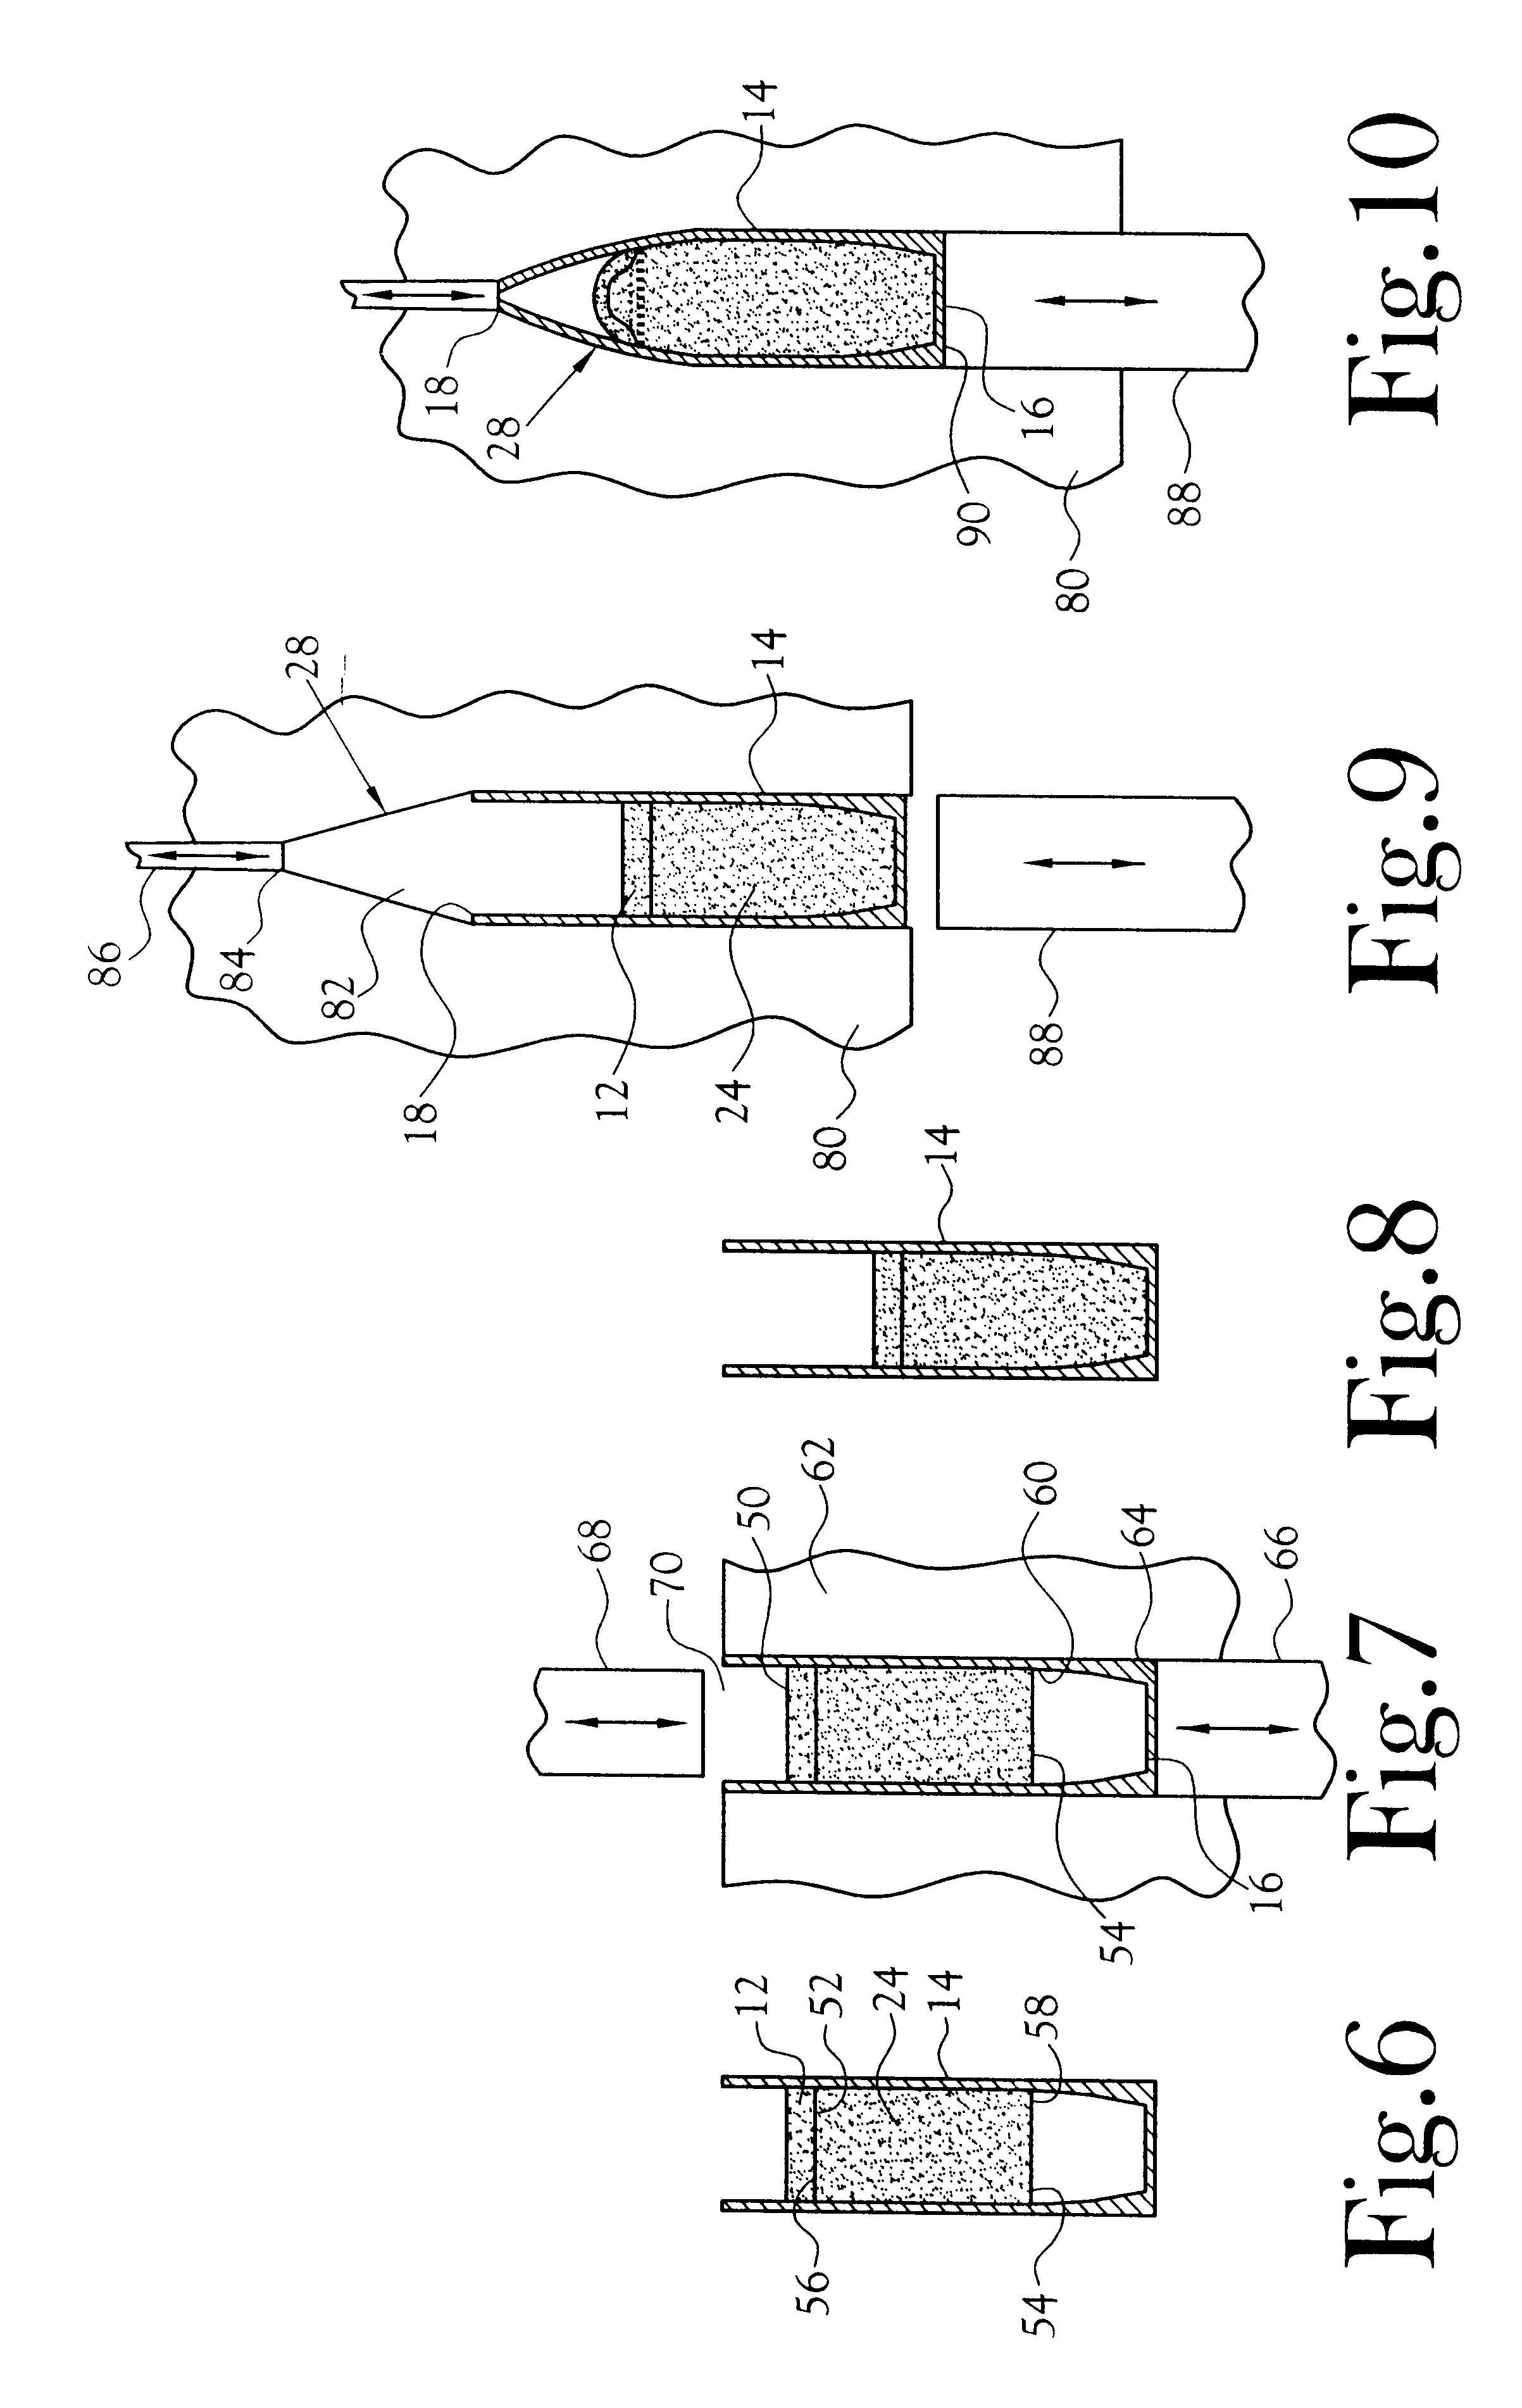 Powder-based disc for gun ammunition having a projectile which includes a frangible powder-based core disposed within a metallic jacket